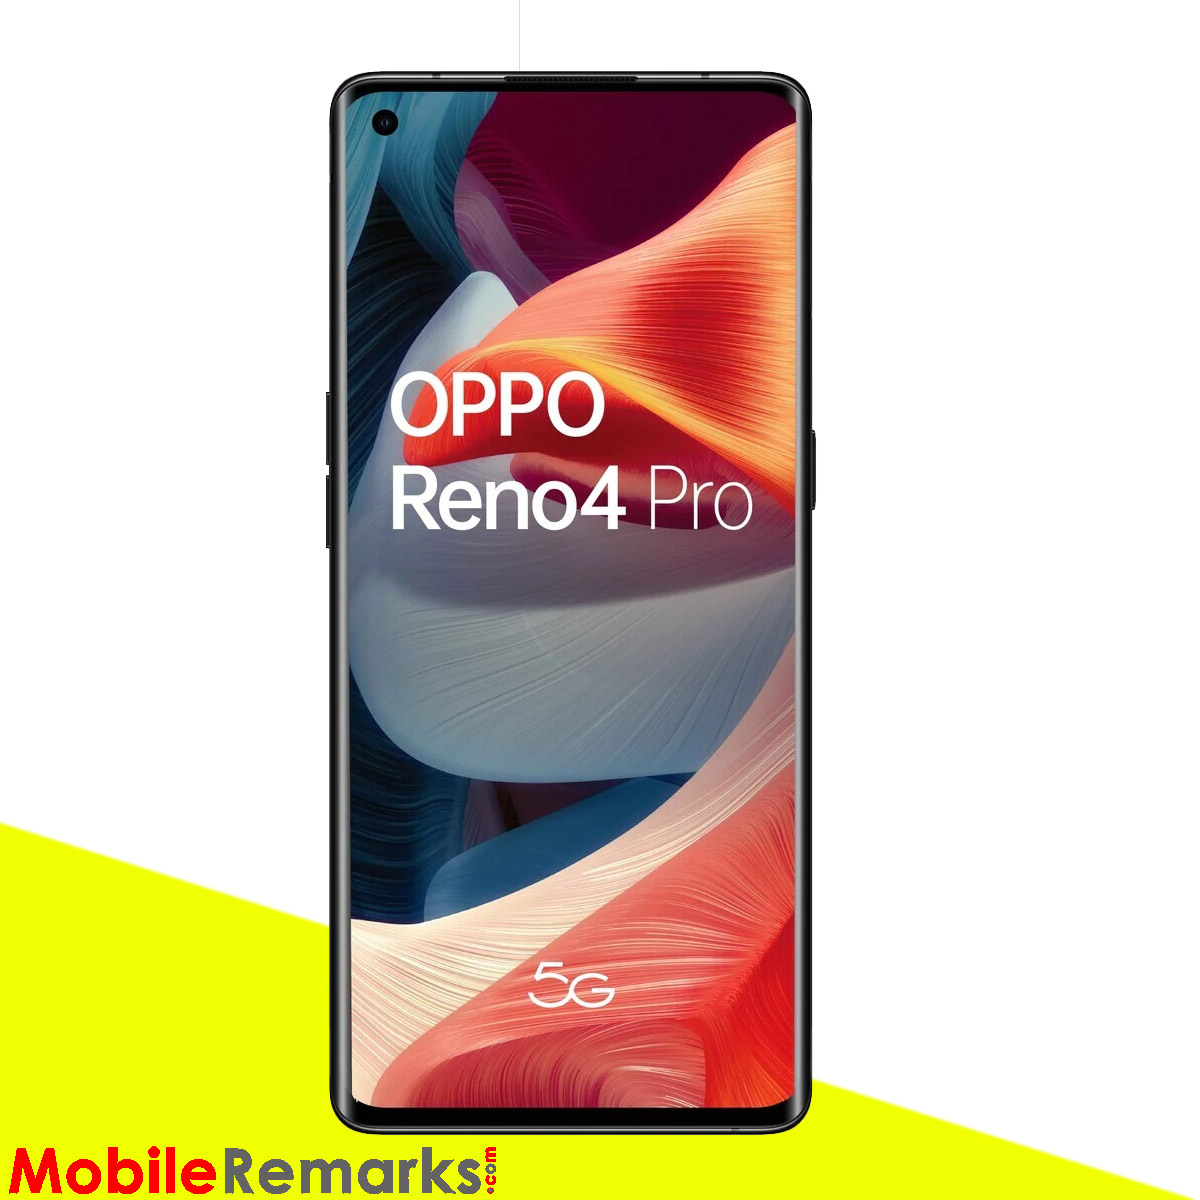 Oppo Reno4 Pro 5G in for review